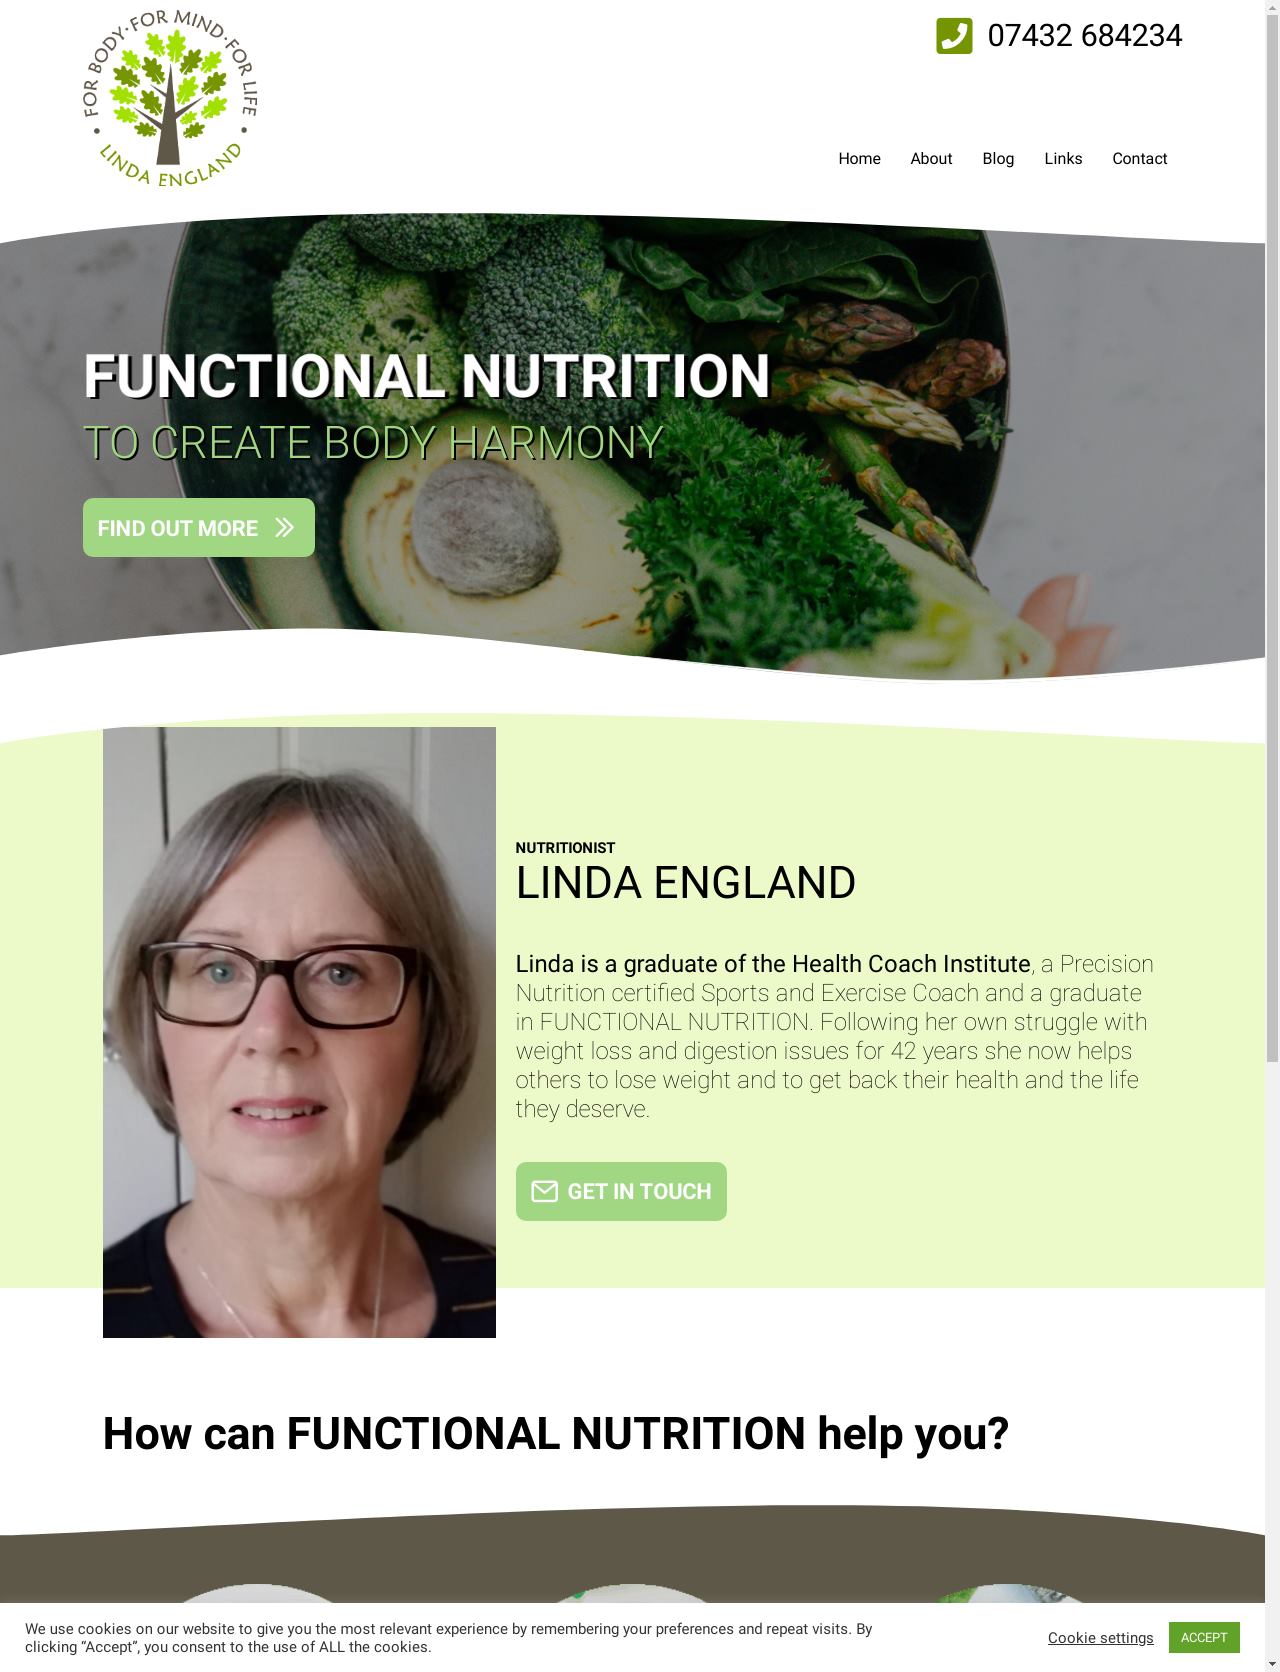 Functional Nutrition website, designed and developed by MK Web